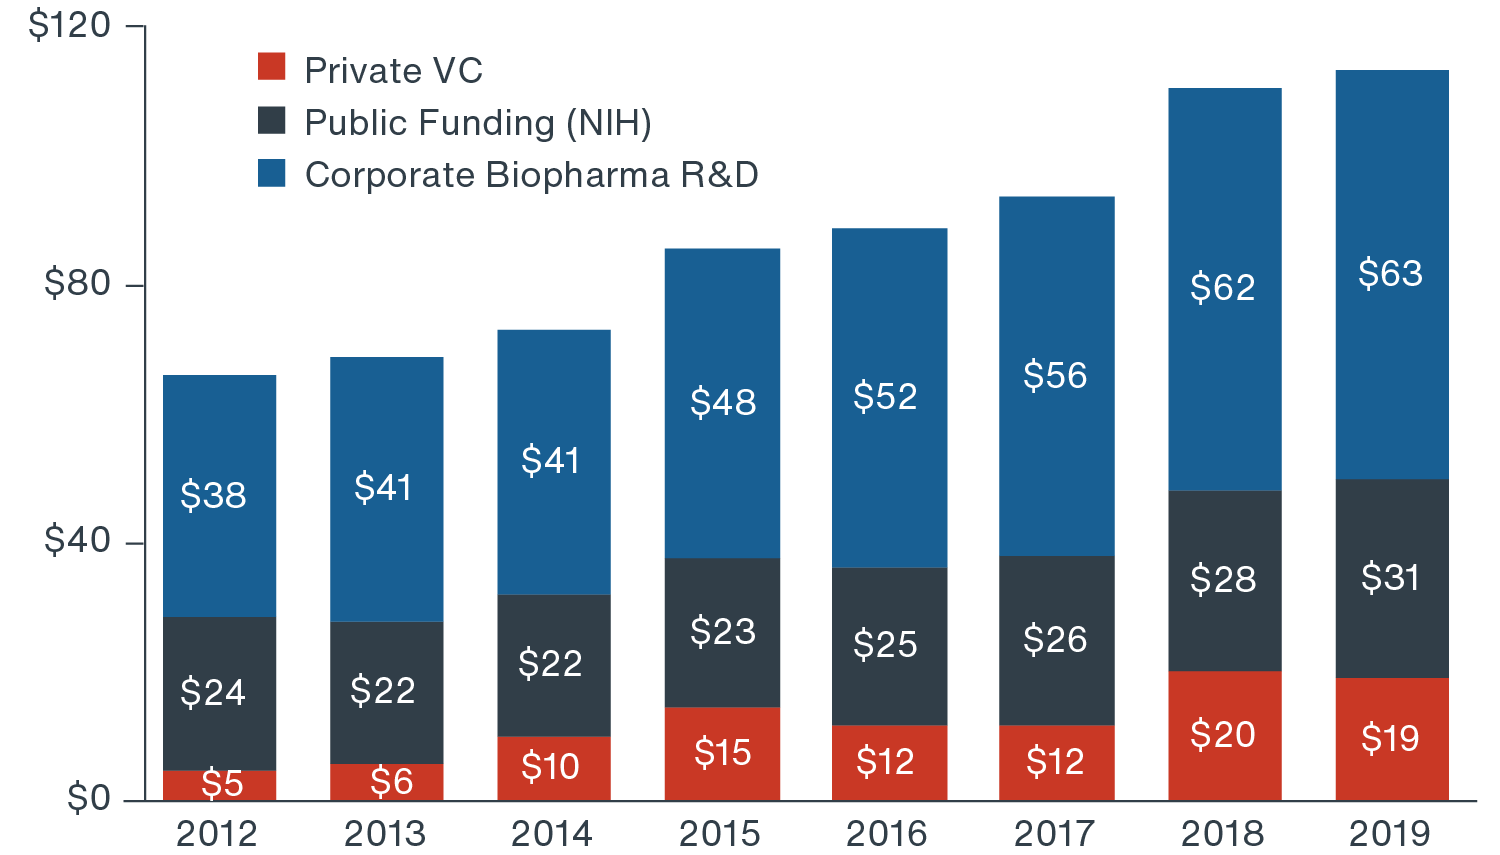 Total U.S. life sciences R&D capital investment by source